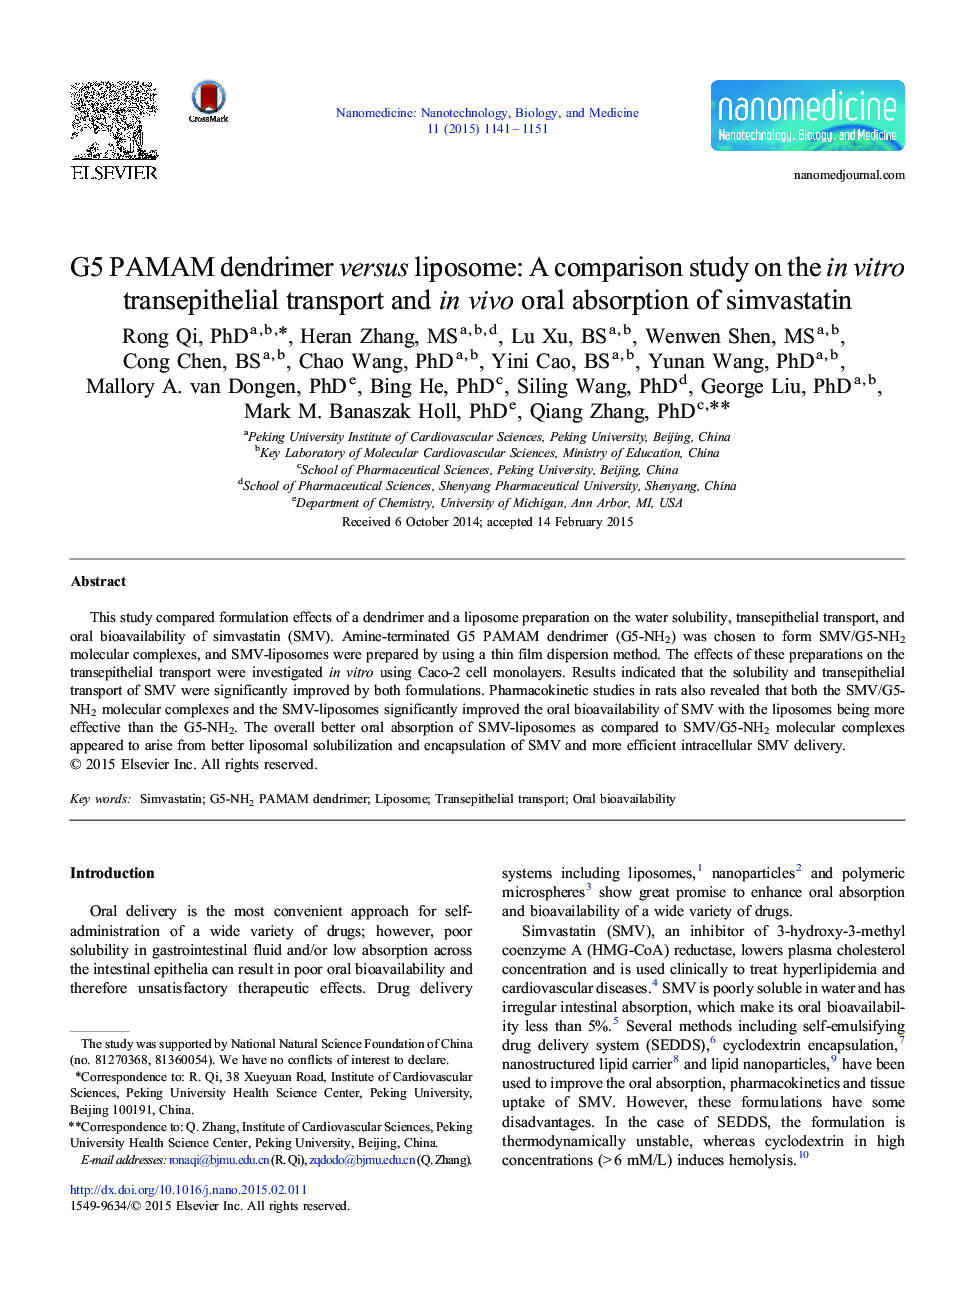 G5 PAMAM dendrimer versus liposome: A comparison study on the in vitro transepithelial transport and in vivo oral absorption of simvastatin